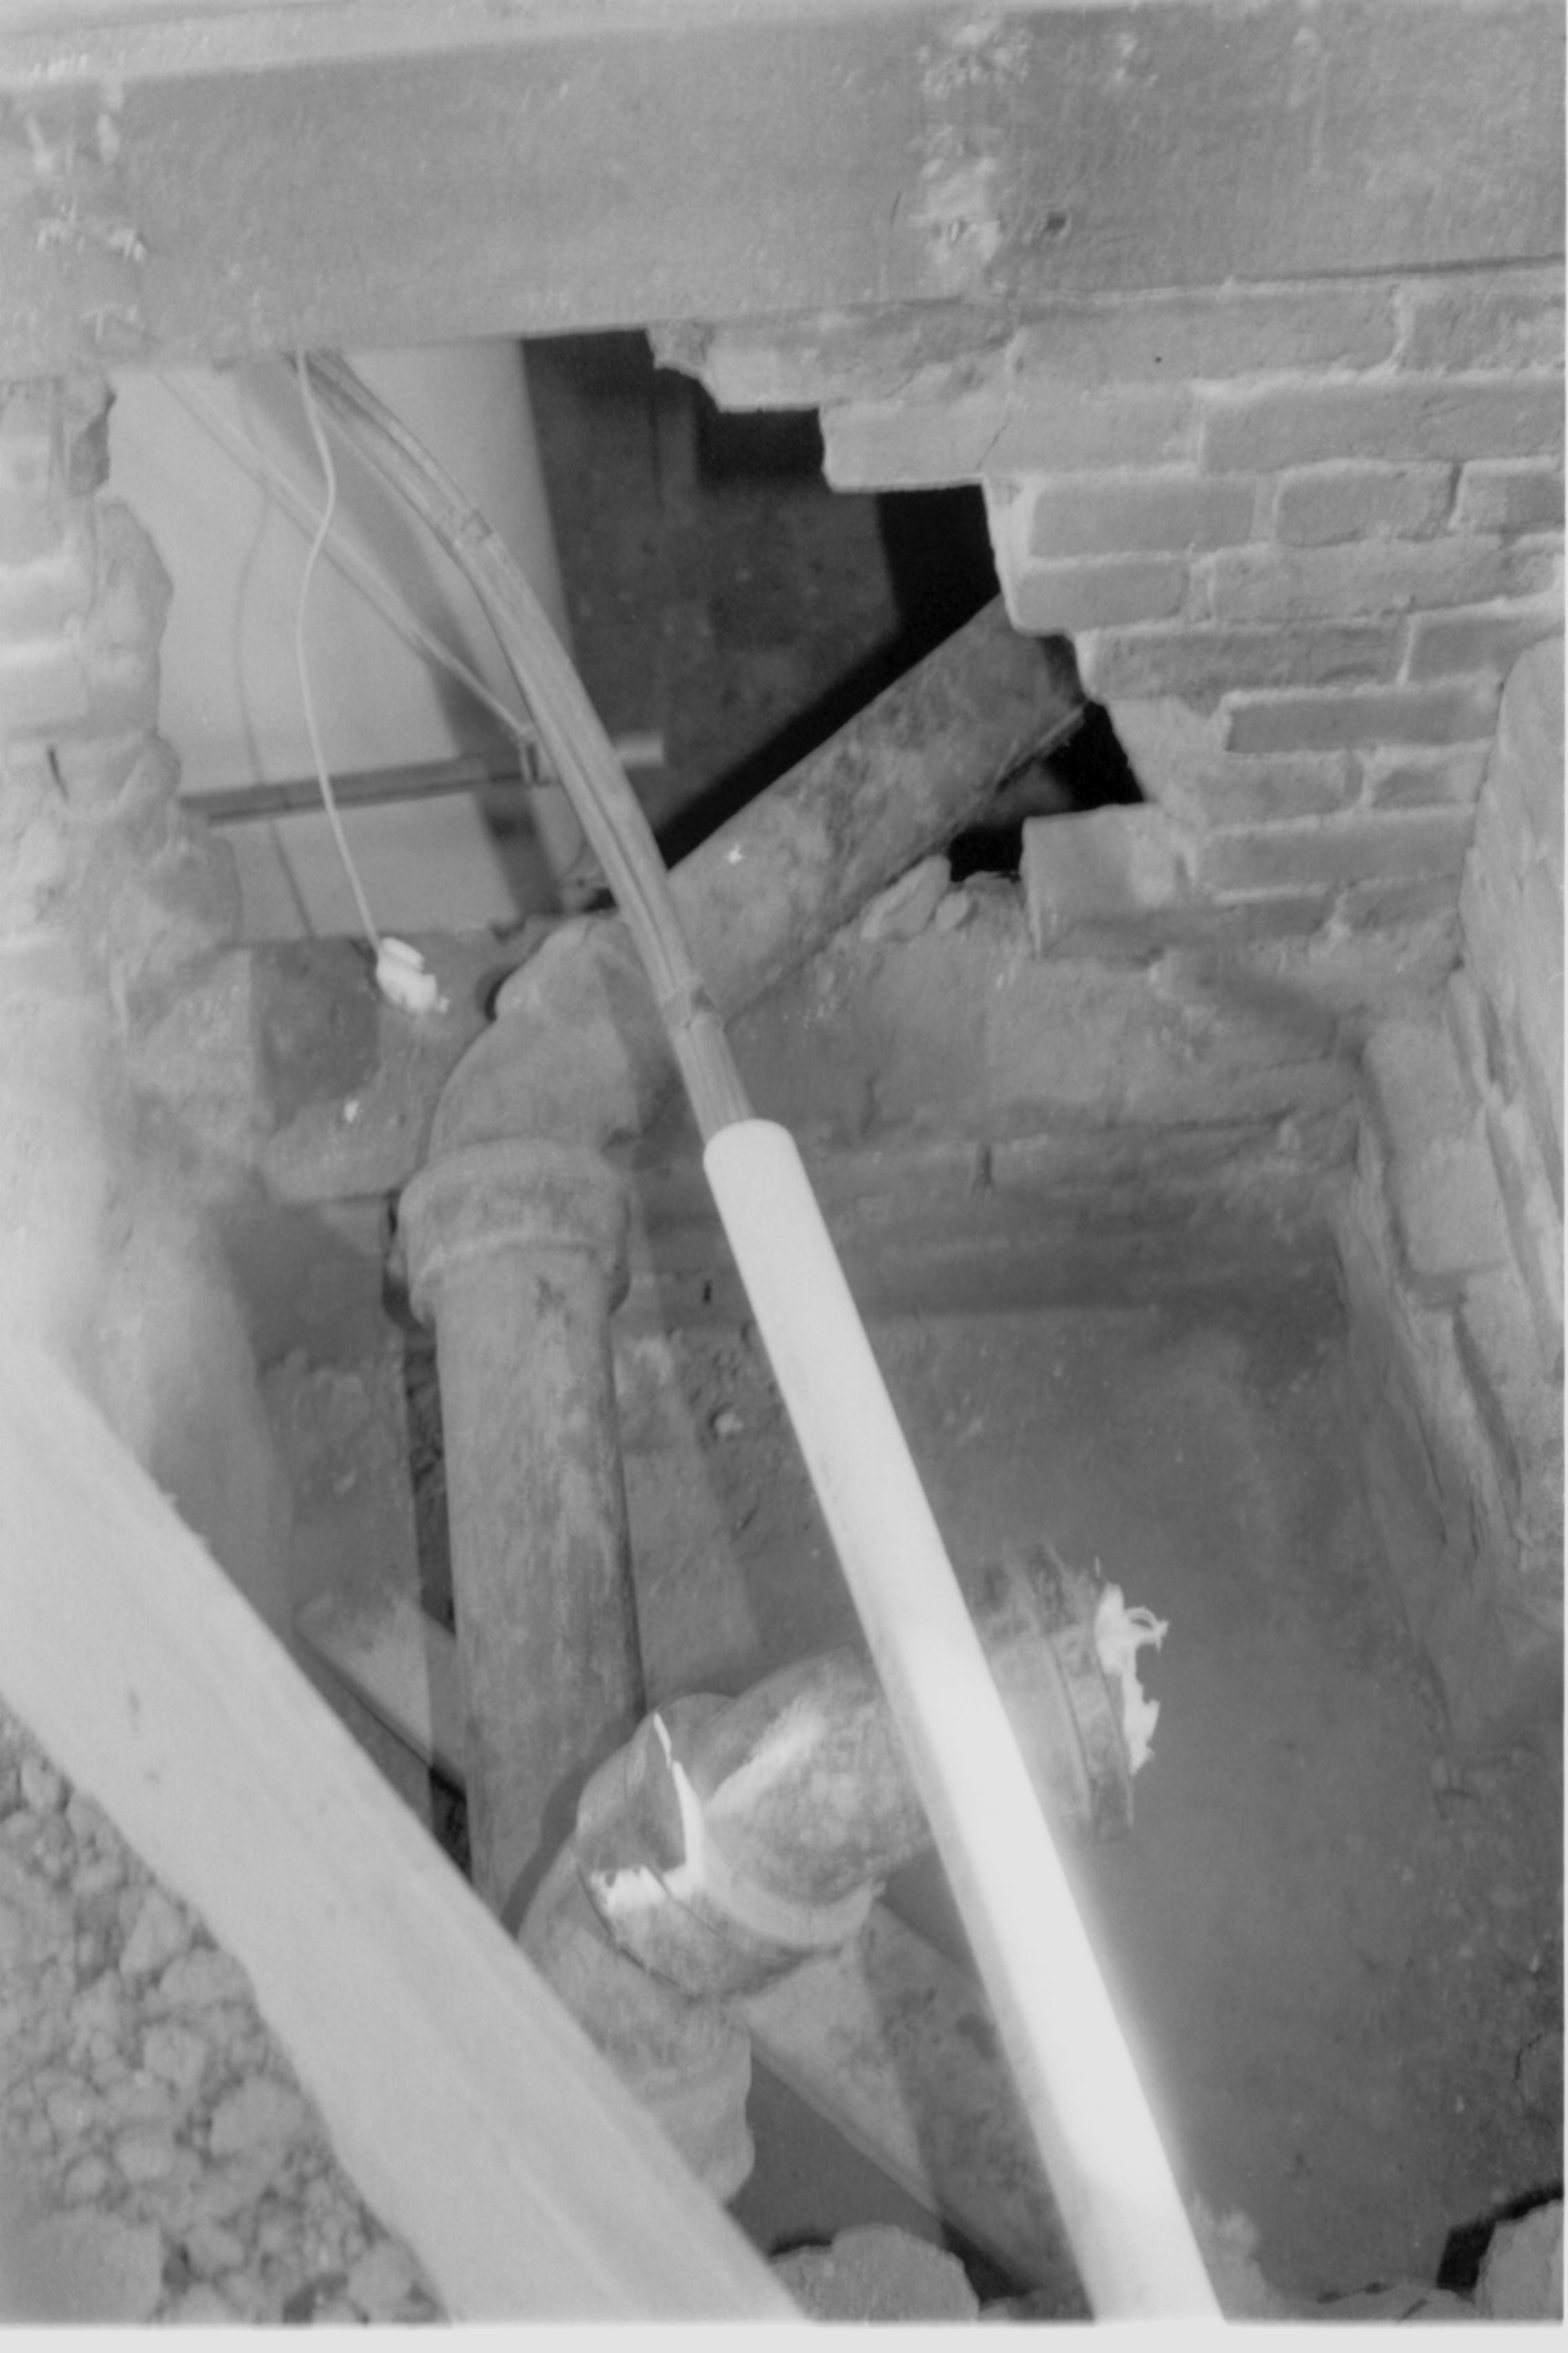 Morse House HS-9 Test Site #3. Pipes and electrical conduit leading into the Morse basement, through foundation wall. Steps can be seen to right.